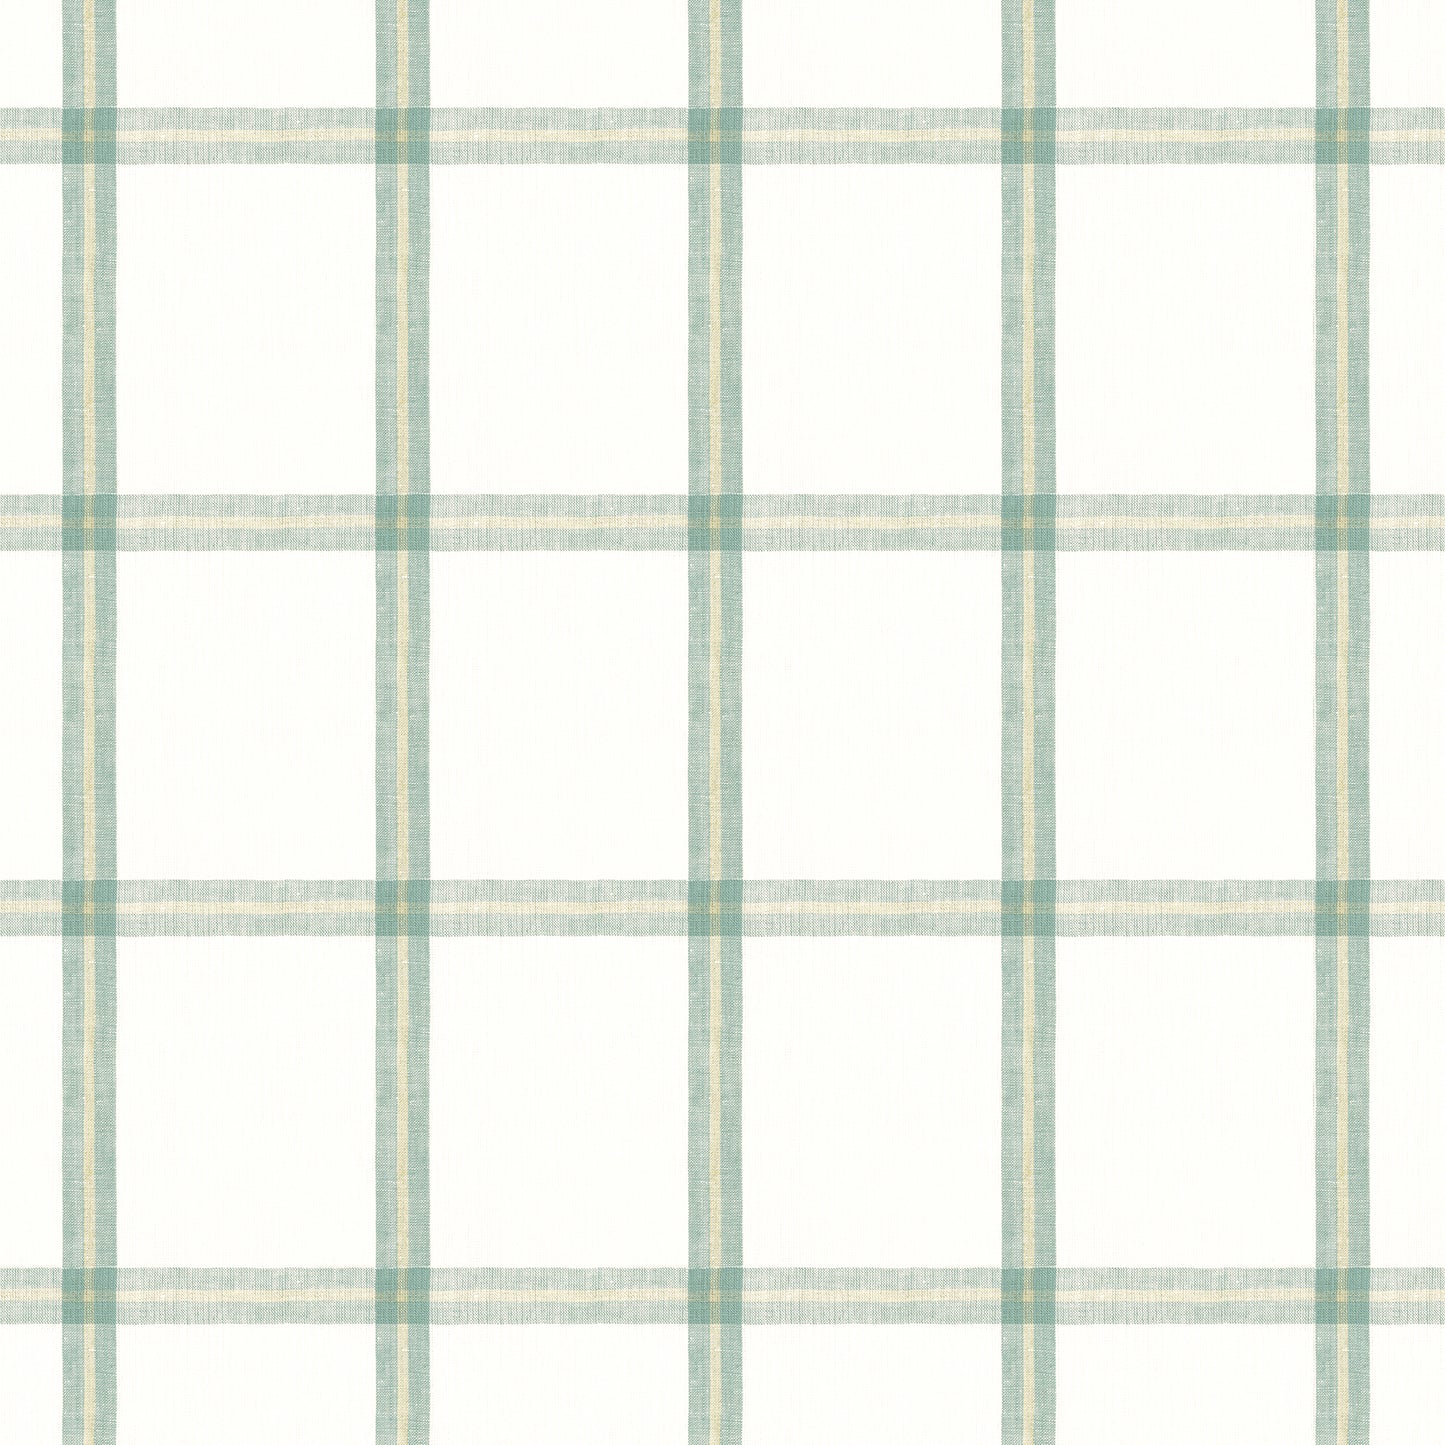 Purchase Thibaut Fabric Product# W781335 pattern name Huntington Plaid color Seaglass